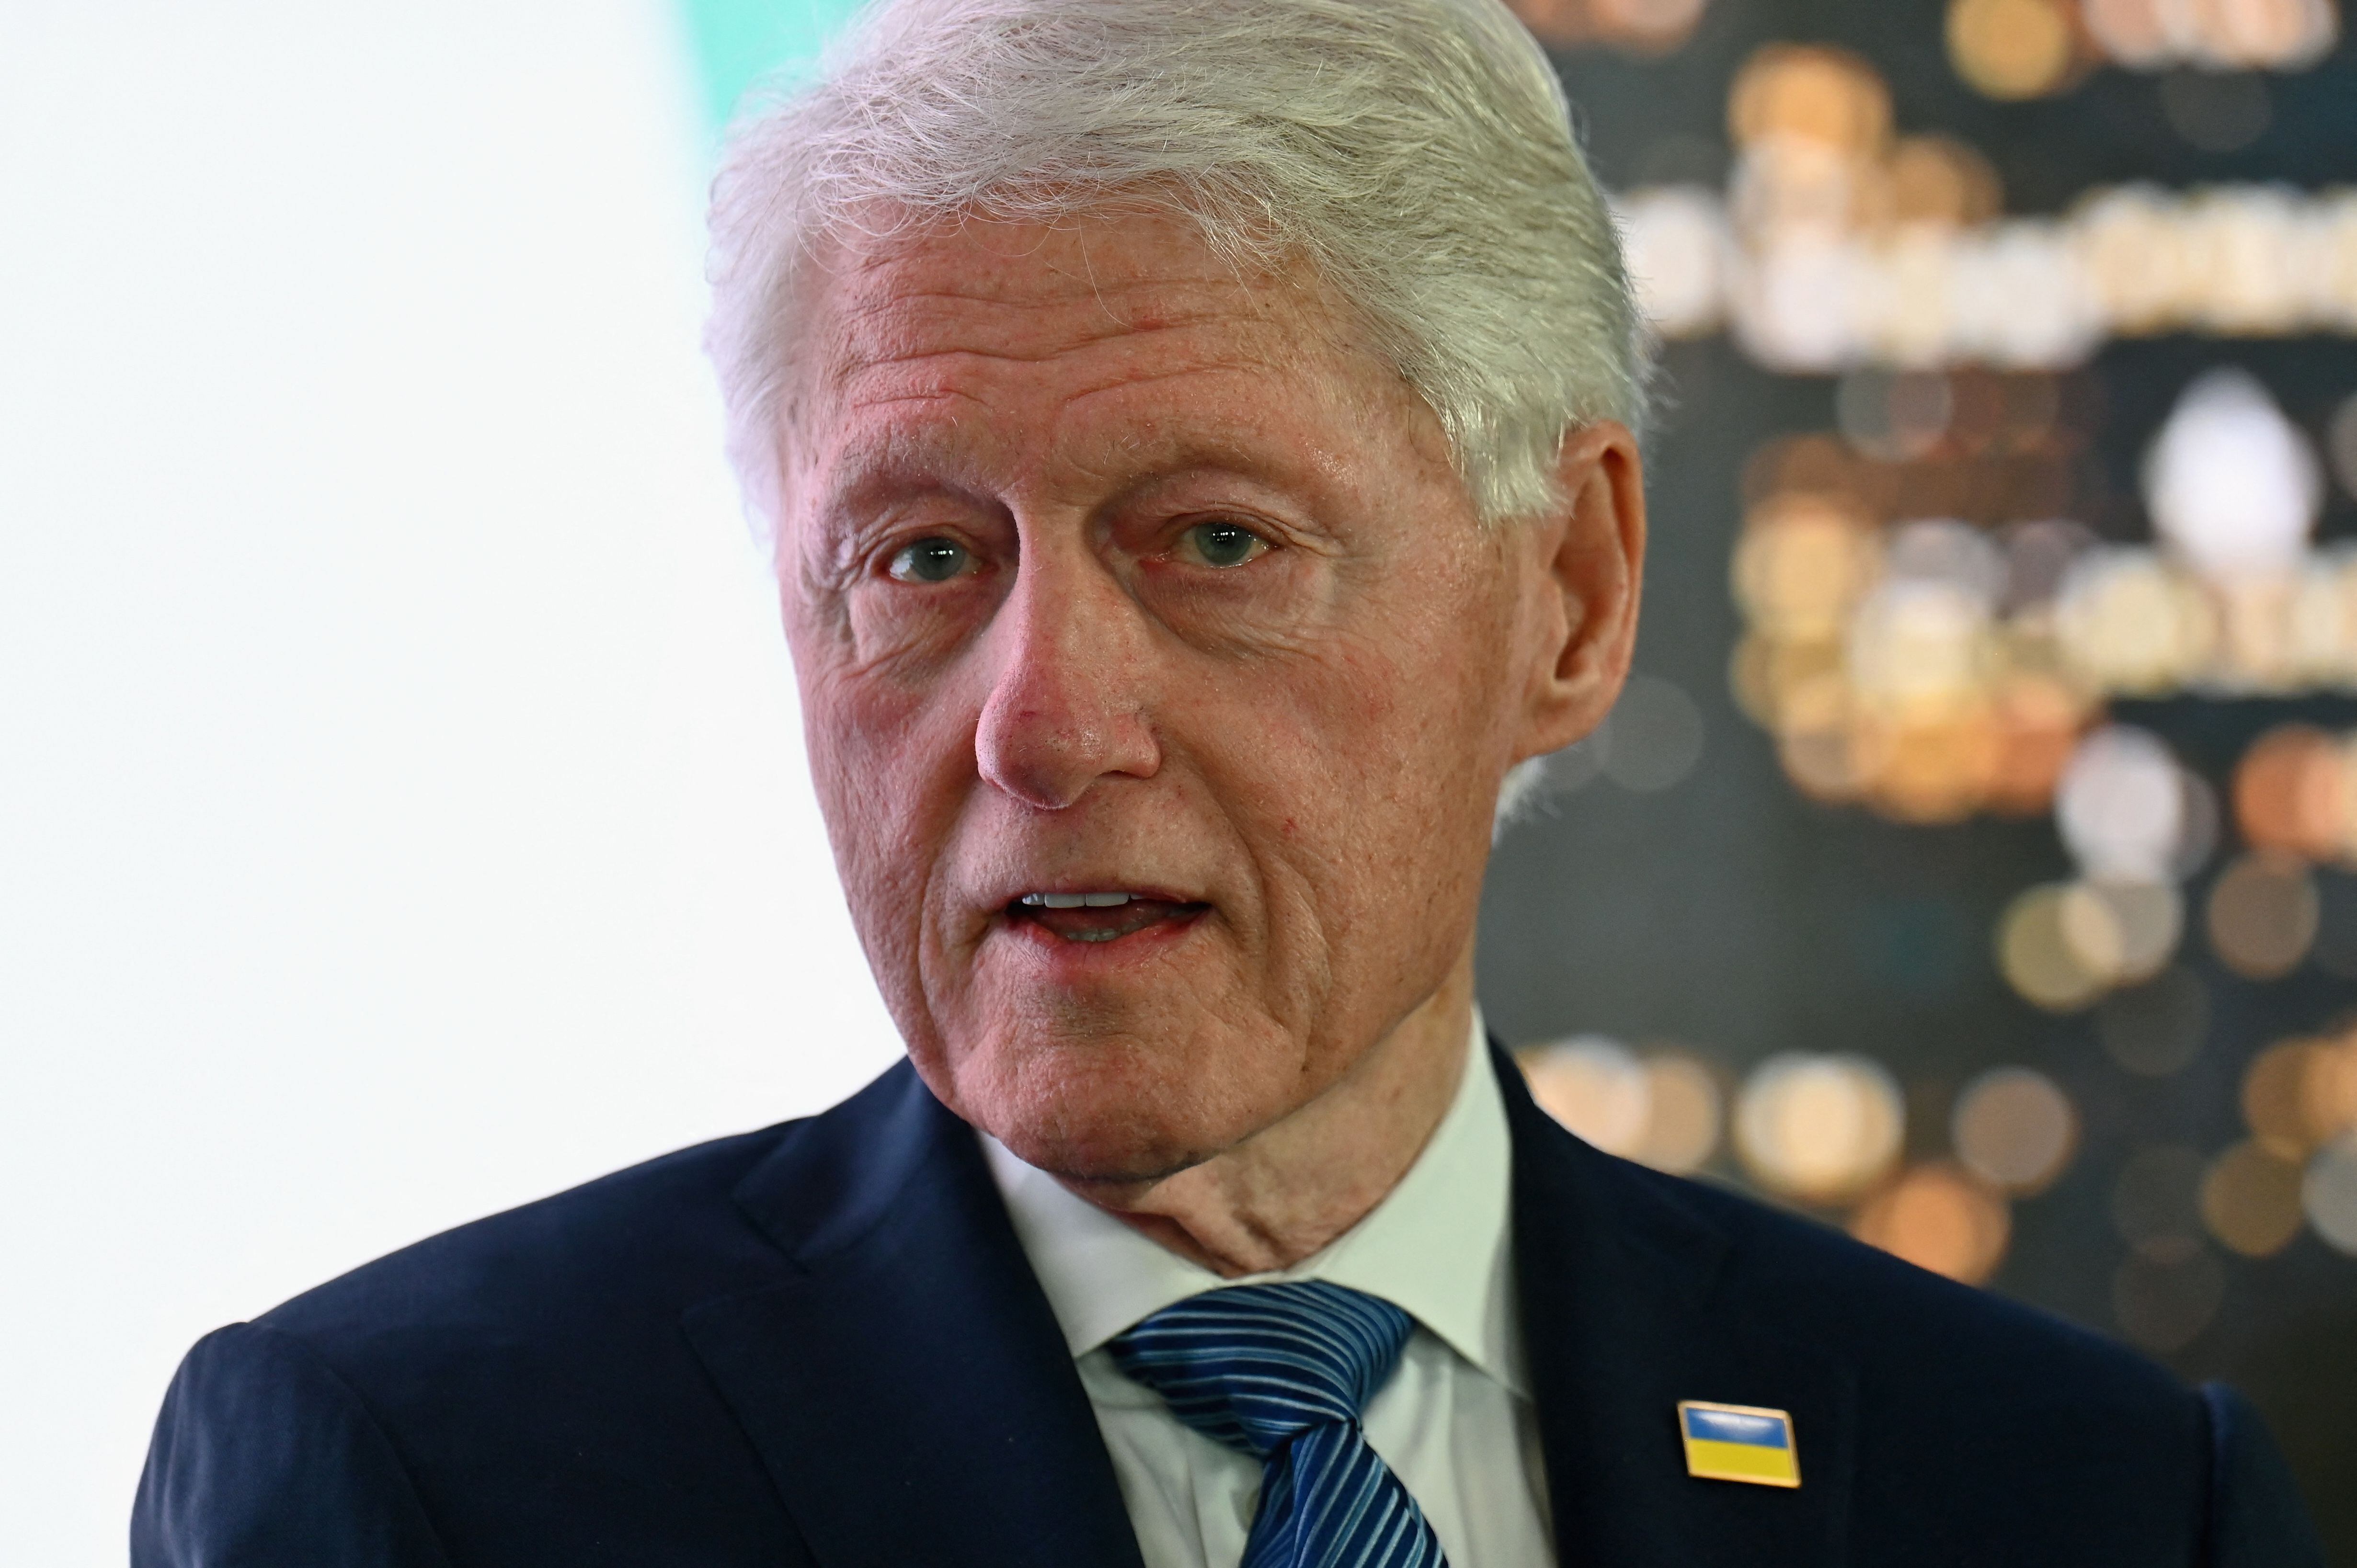 Former US President Bill Clinton speaks during a press conference hosted by Empire State Realty Trust on April 21, 2022 in New York City.  (Photo by Angela Weiss/AFP).